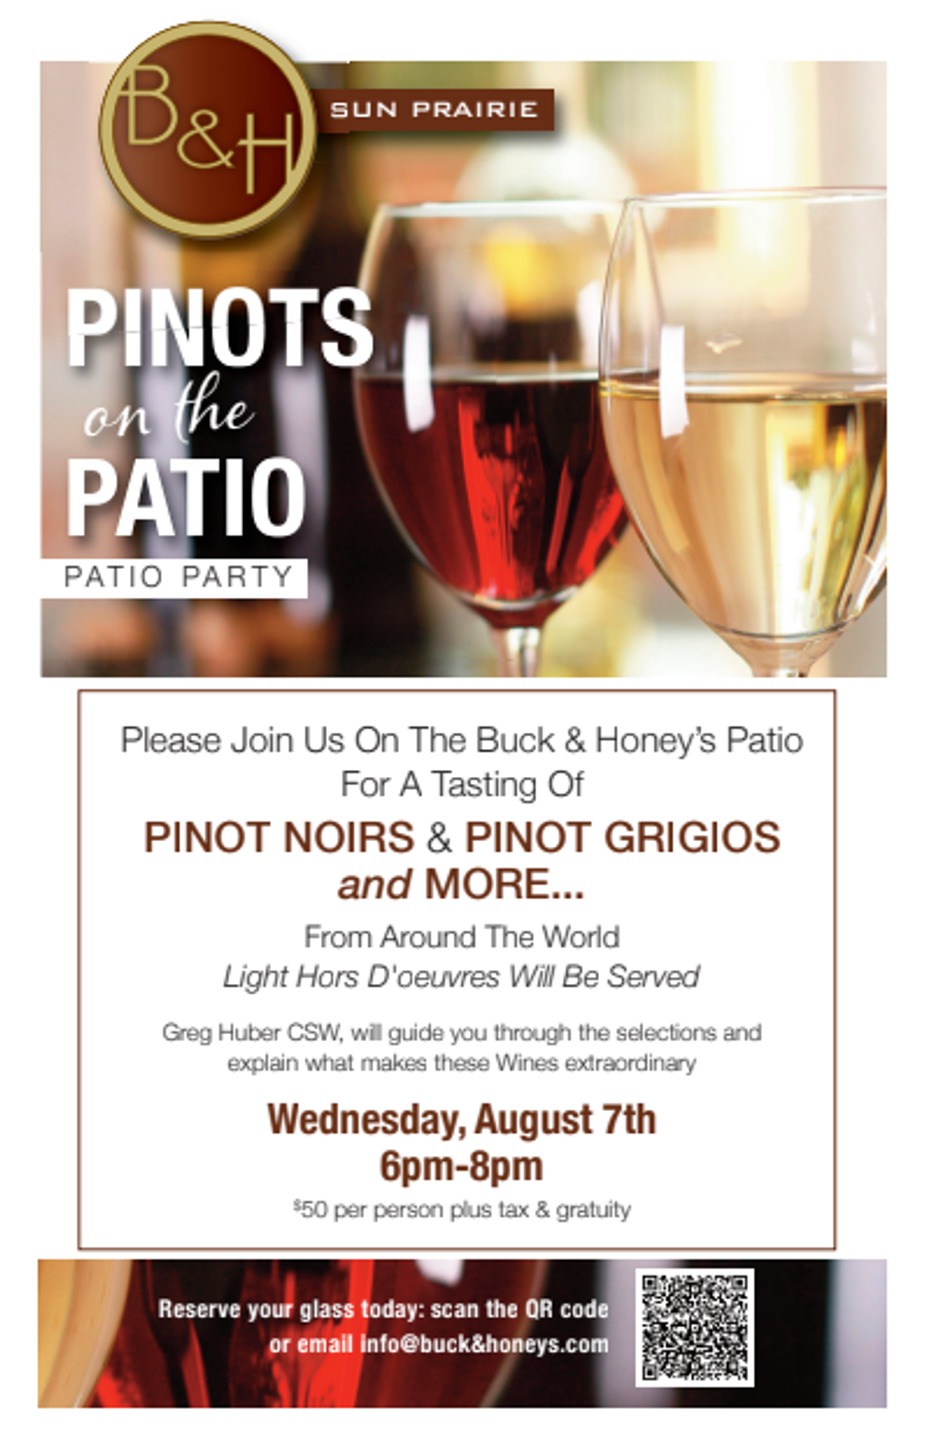 Pinots on the Patio event photo